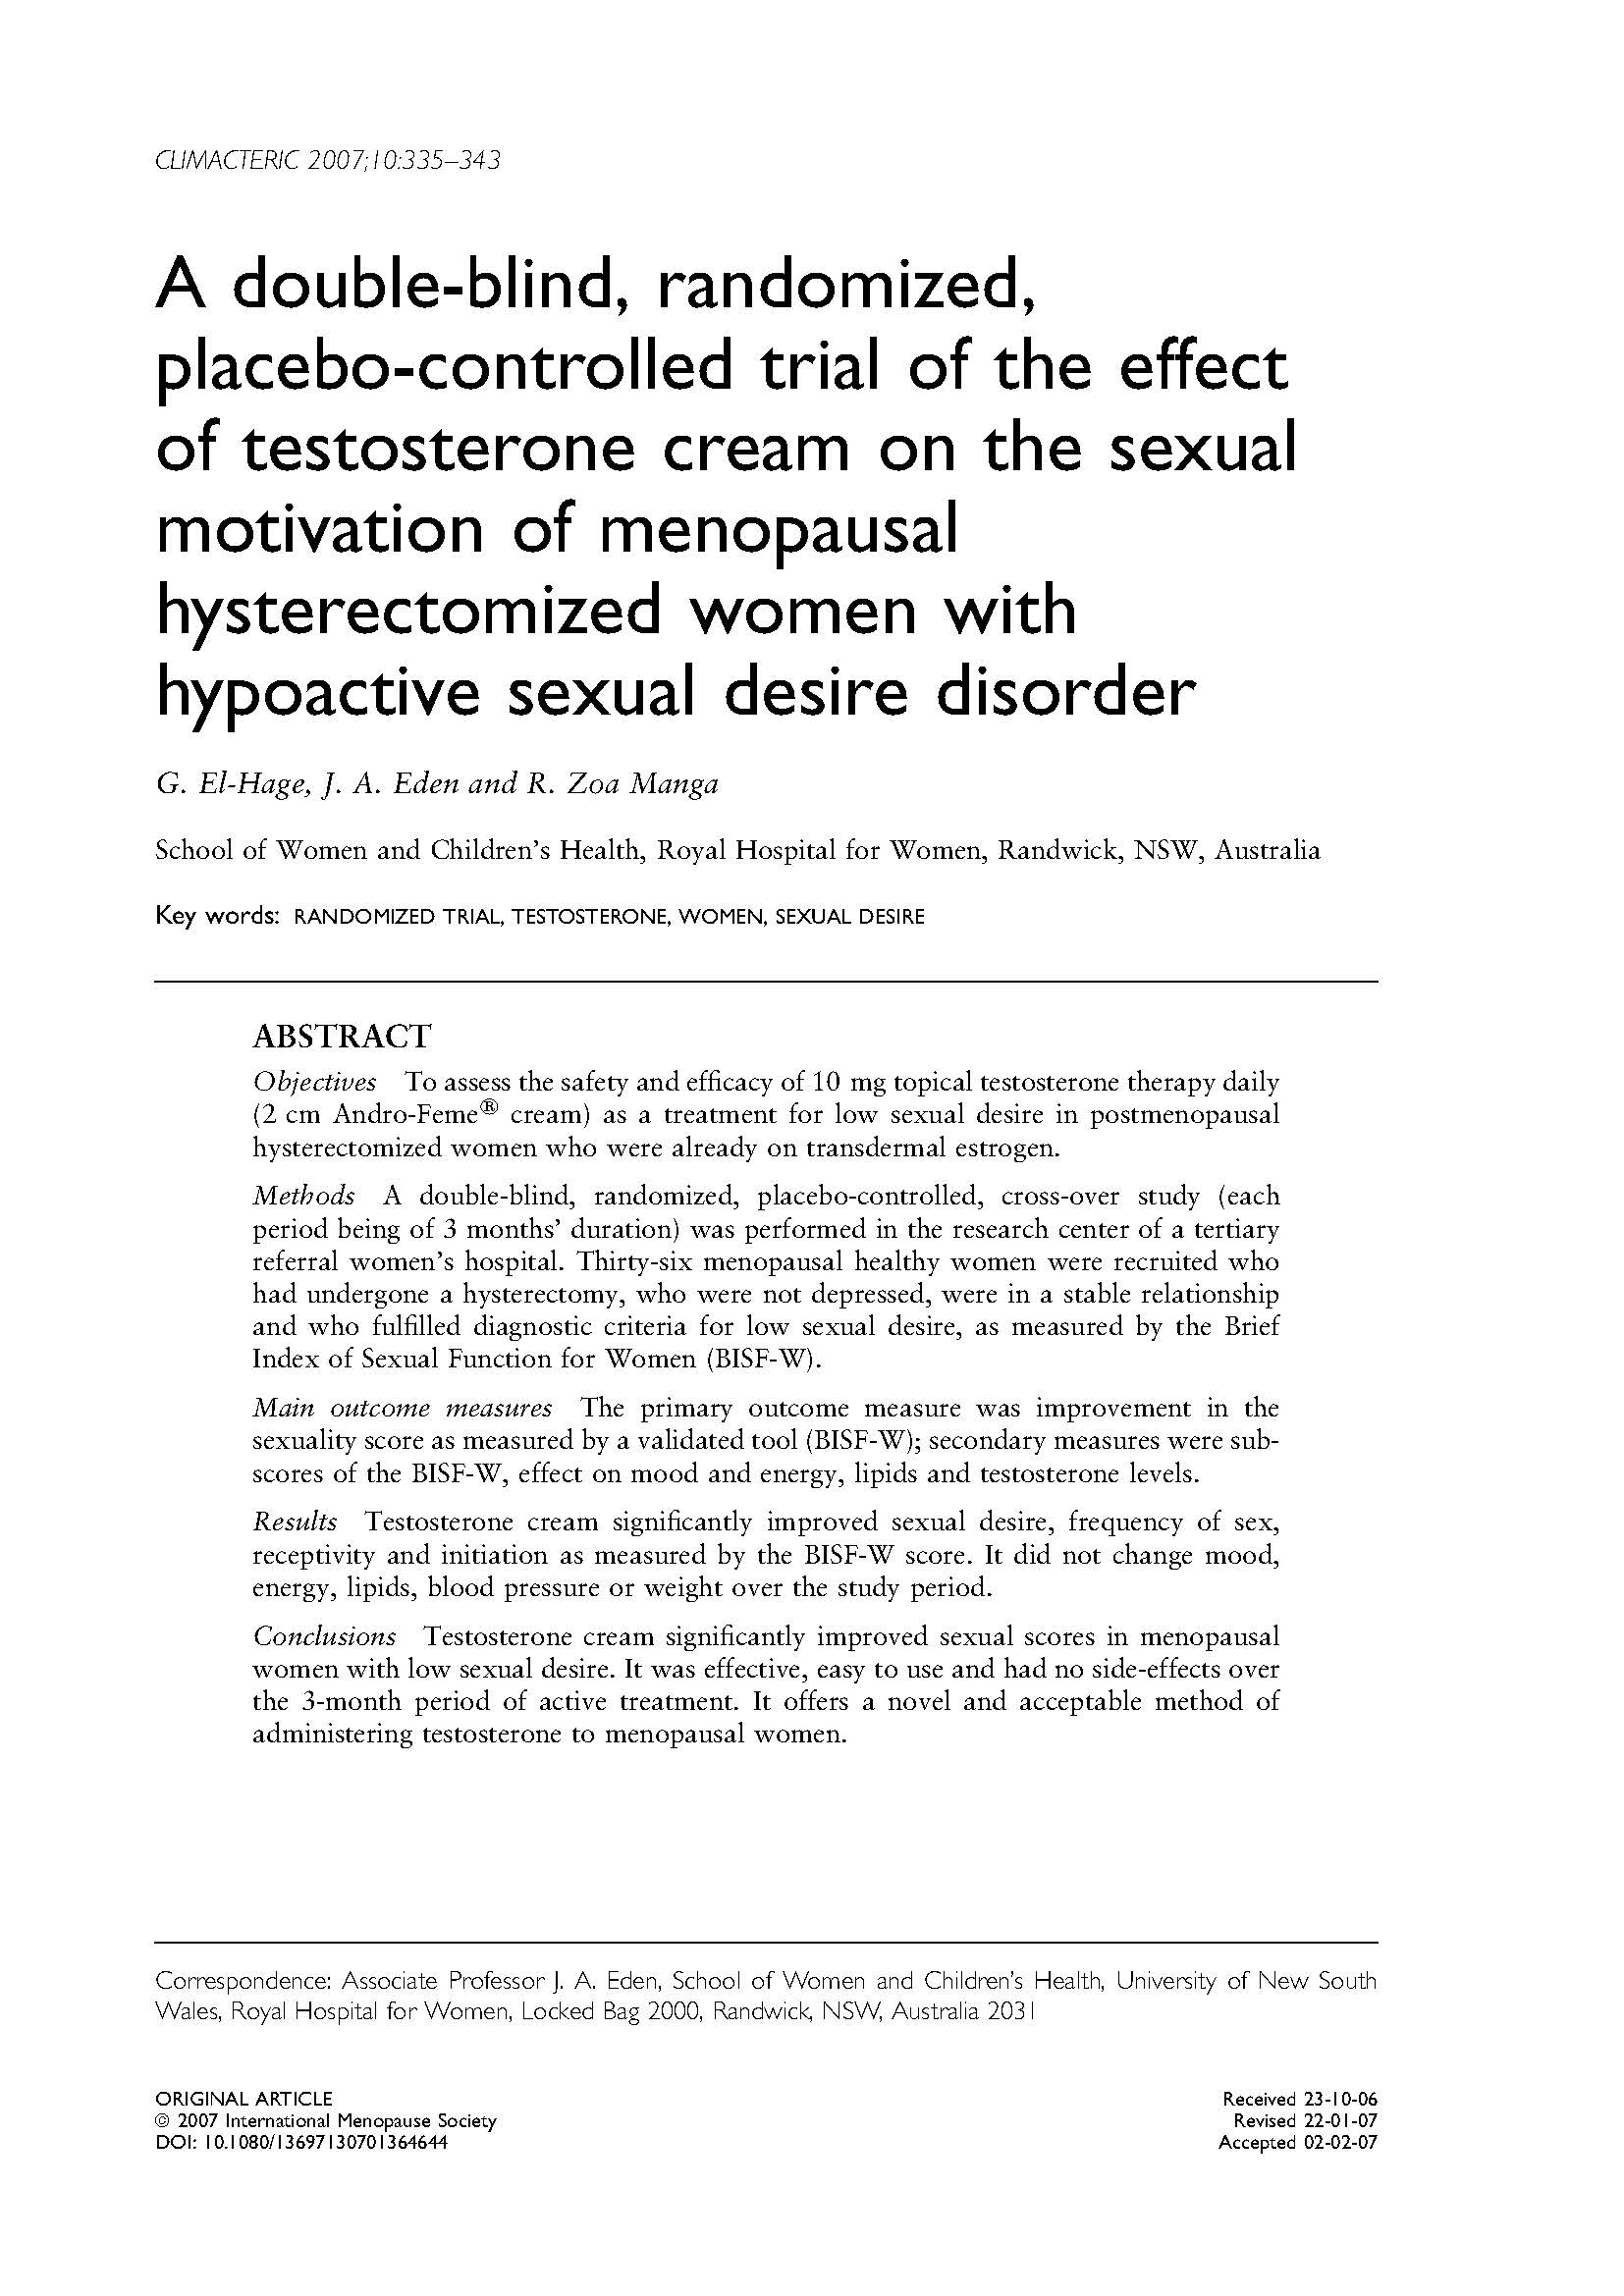 A double-blind, randomized, placebo-controlled trial of the effect of testosterone cream on the sexual motivation of menopausal hysterectomized women with hypoactive sexual desire disorder